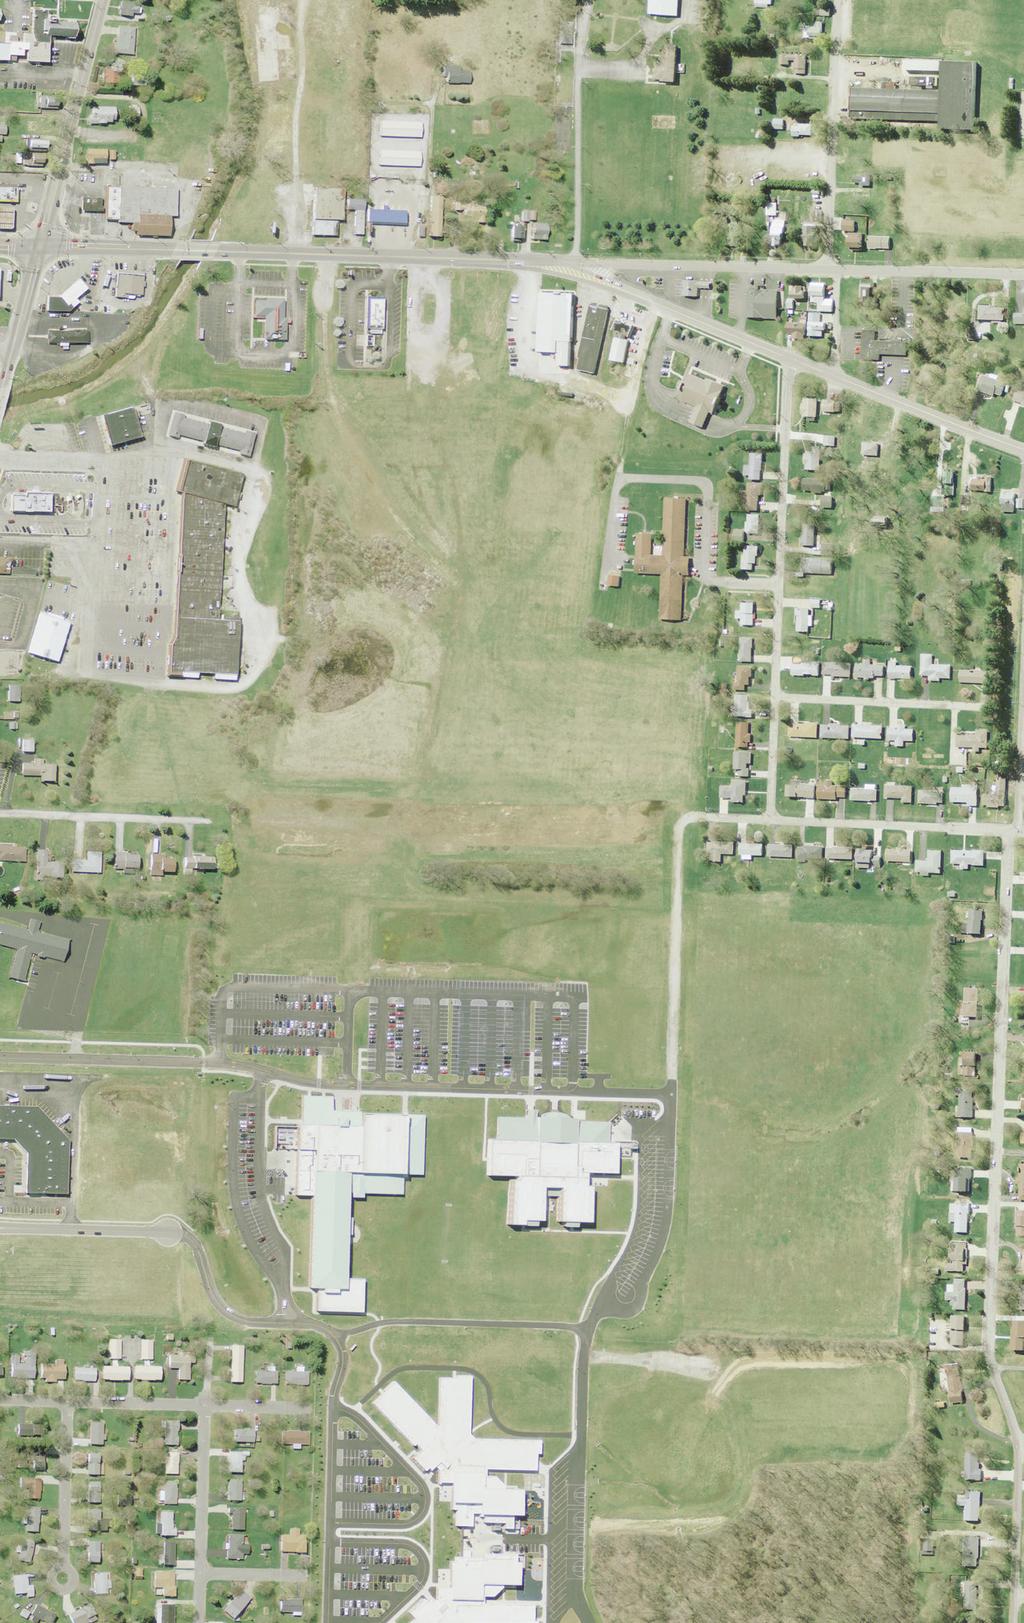 BUCYRUS ROAD & SR 598 GALION, OH 44833 MASTER PLAN MASTER PLAN- OPTION #2 March 13, 2015 ARLINGTON AVE. MULTI-FAMILY HOUSING 15.67 ACRES 2016 2016 HARDING WAY WEST COMMERCIAL ±11.